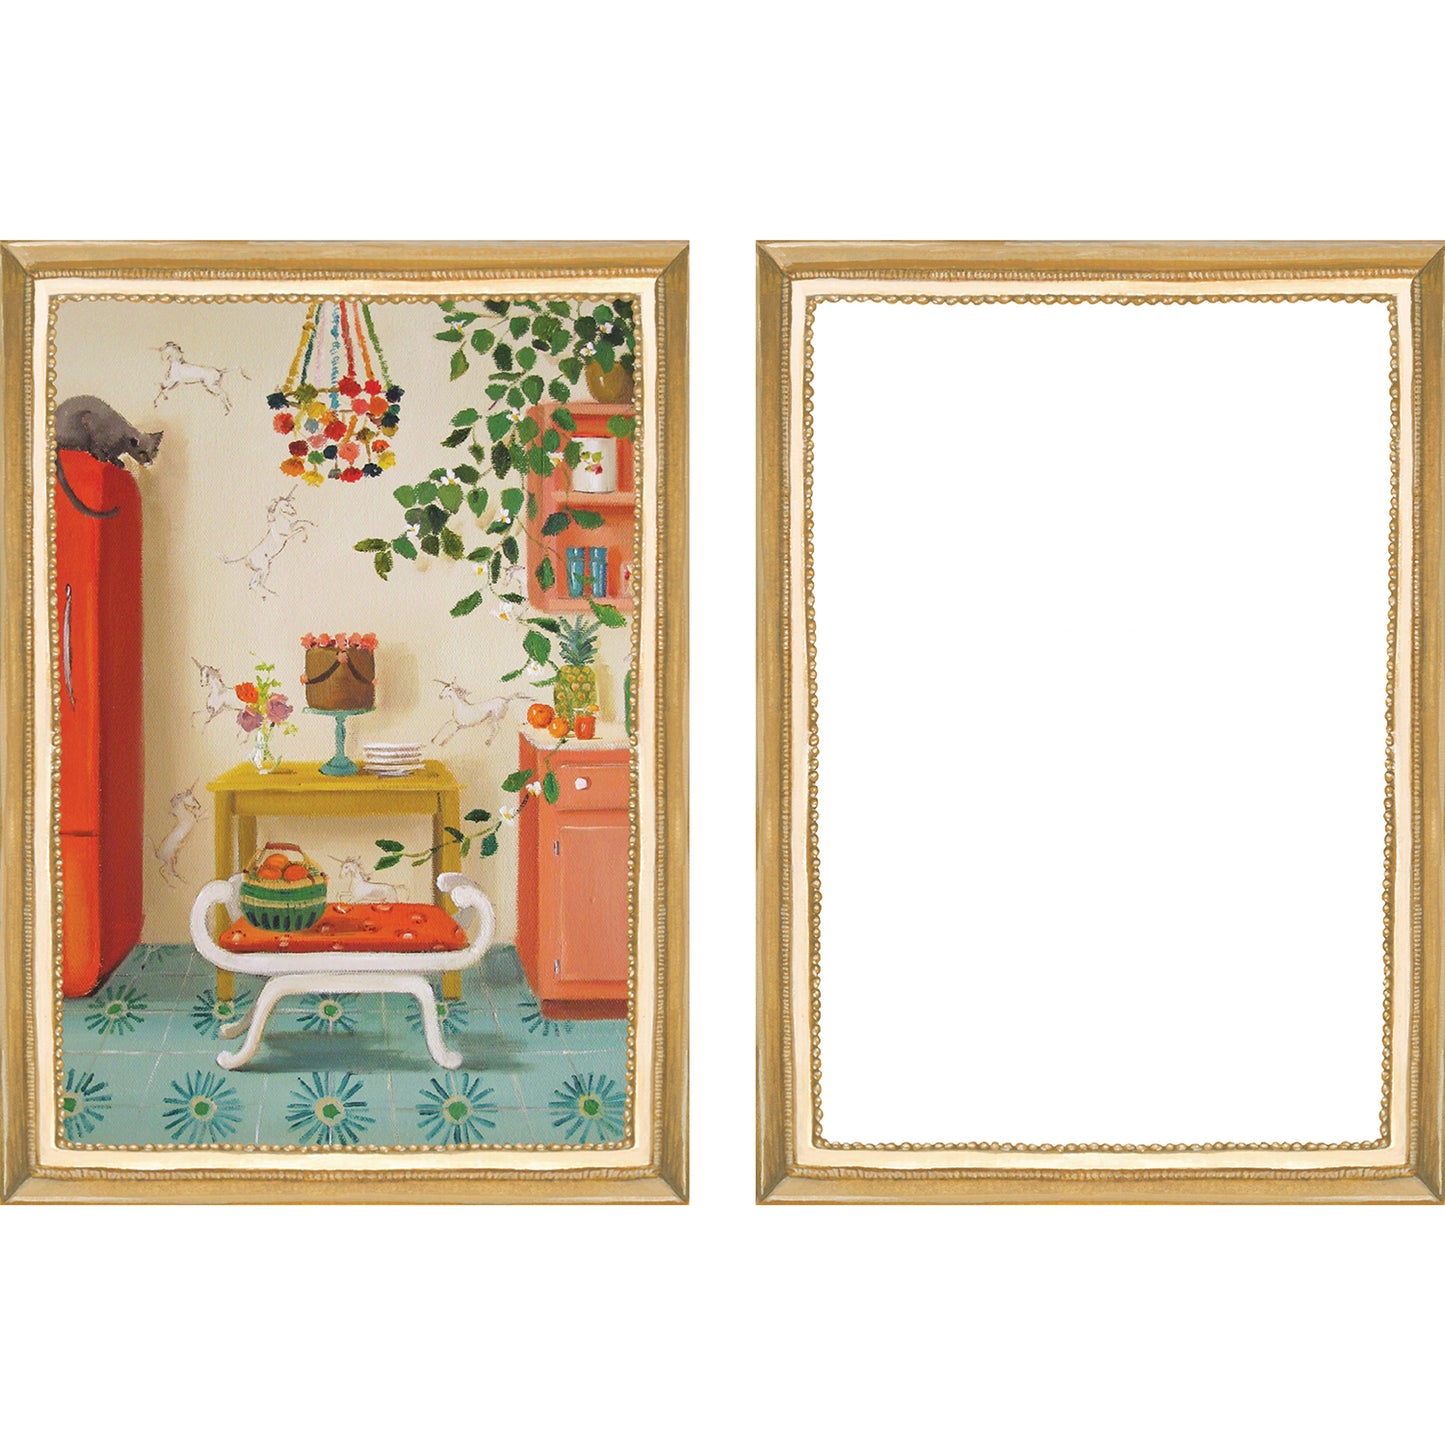 A Fabulous Fête Flat Note Boxed Set of 6 Cards